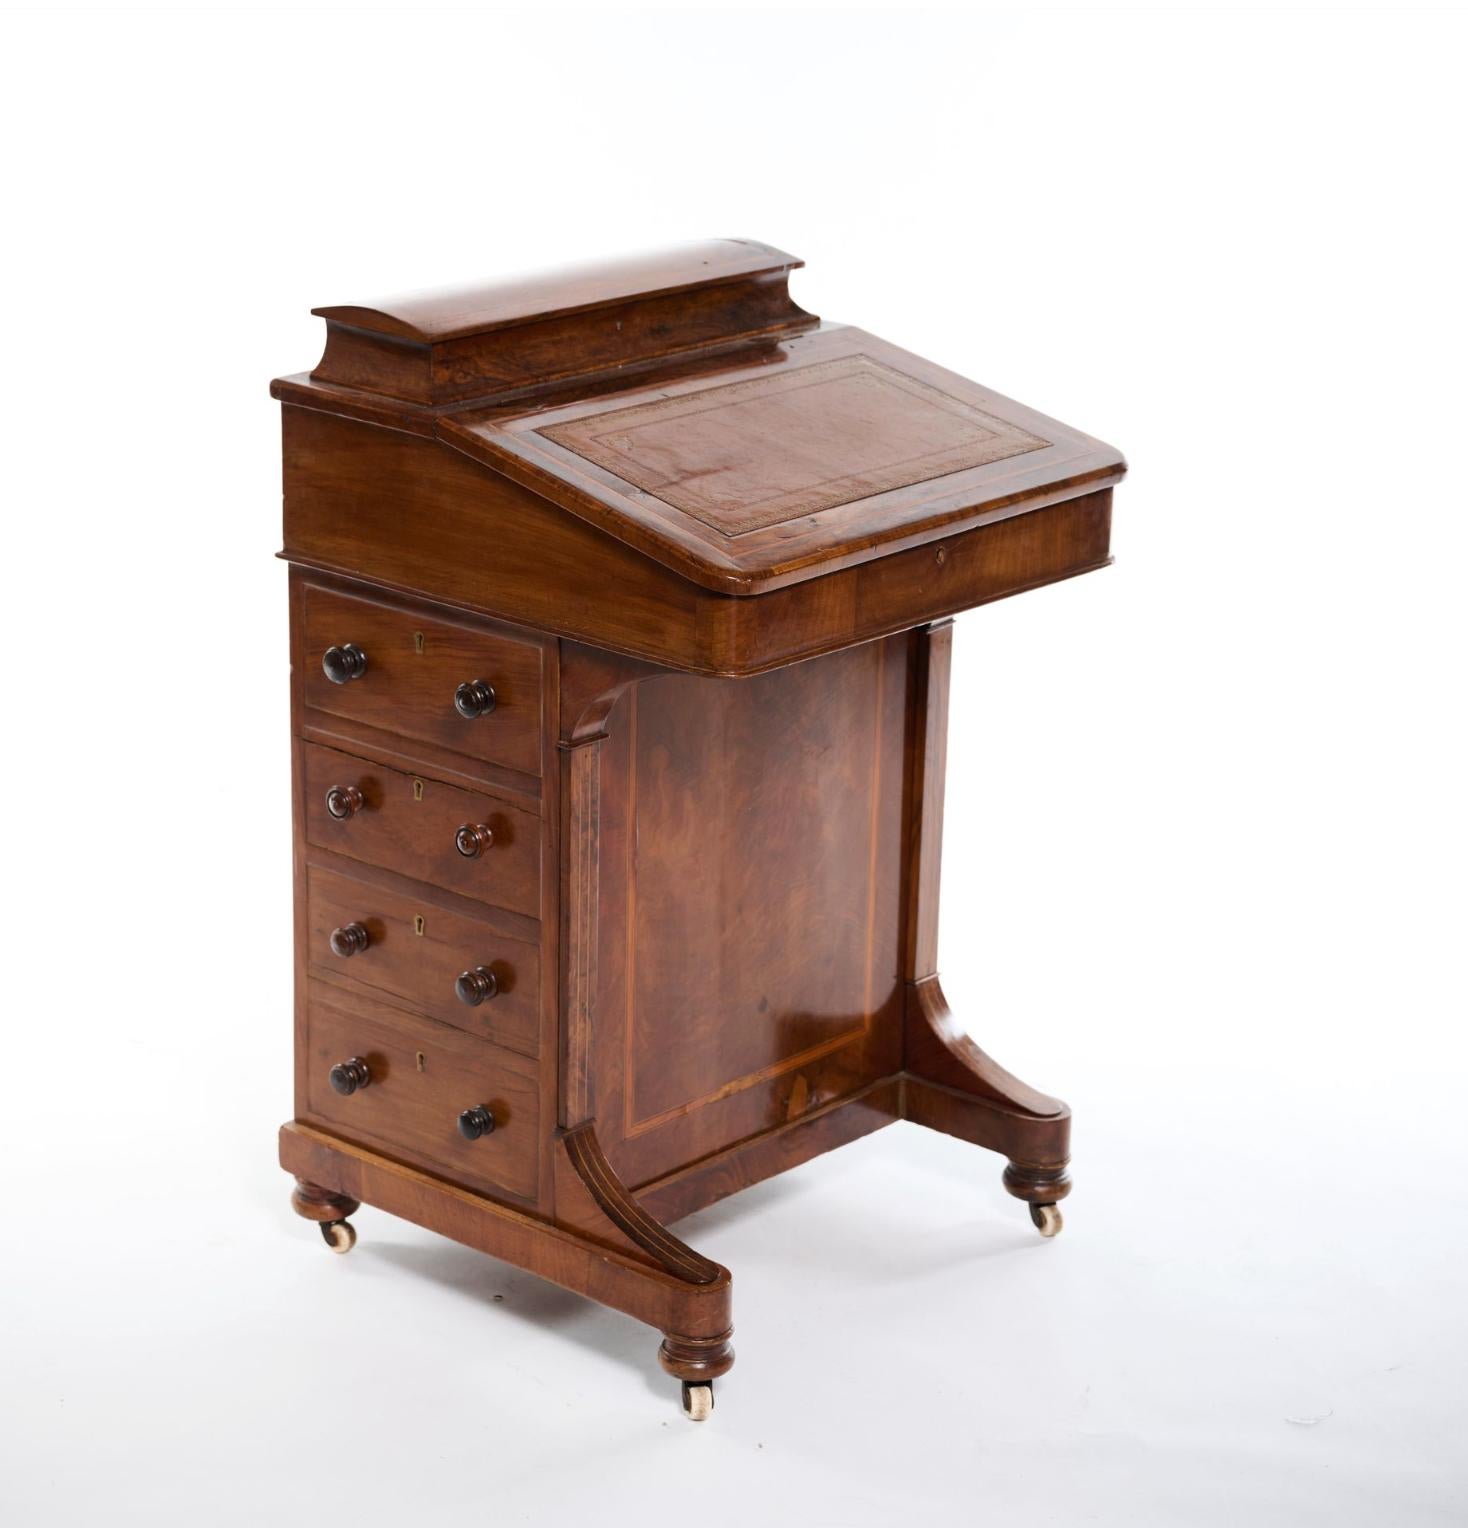 Davenport desk in walnut and burlwood veneer, inlaid in filleted frames, opening with two flaps, one of which is stepped, the first revealing an inkwell and letter compartment, The second, trimmed with fawn leather and gilded with small irons,